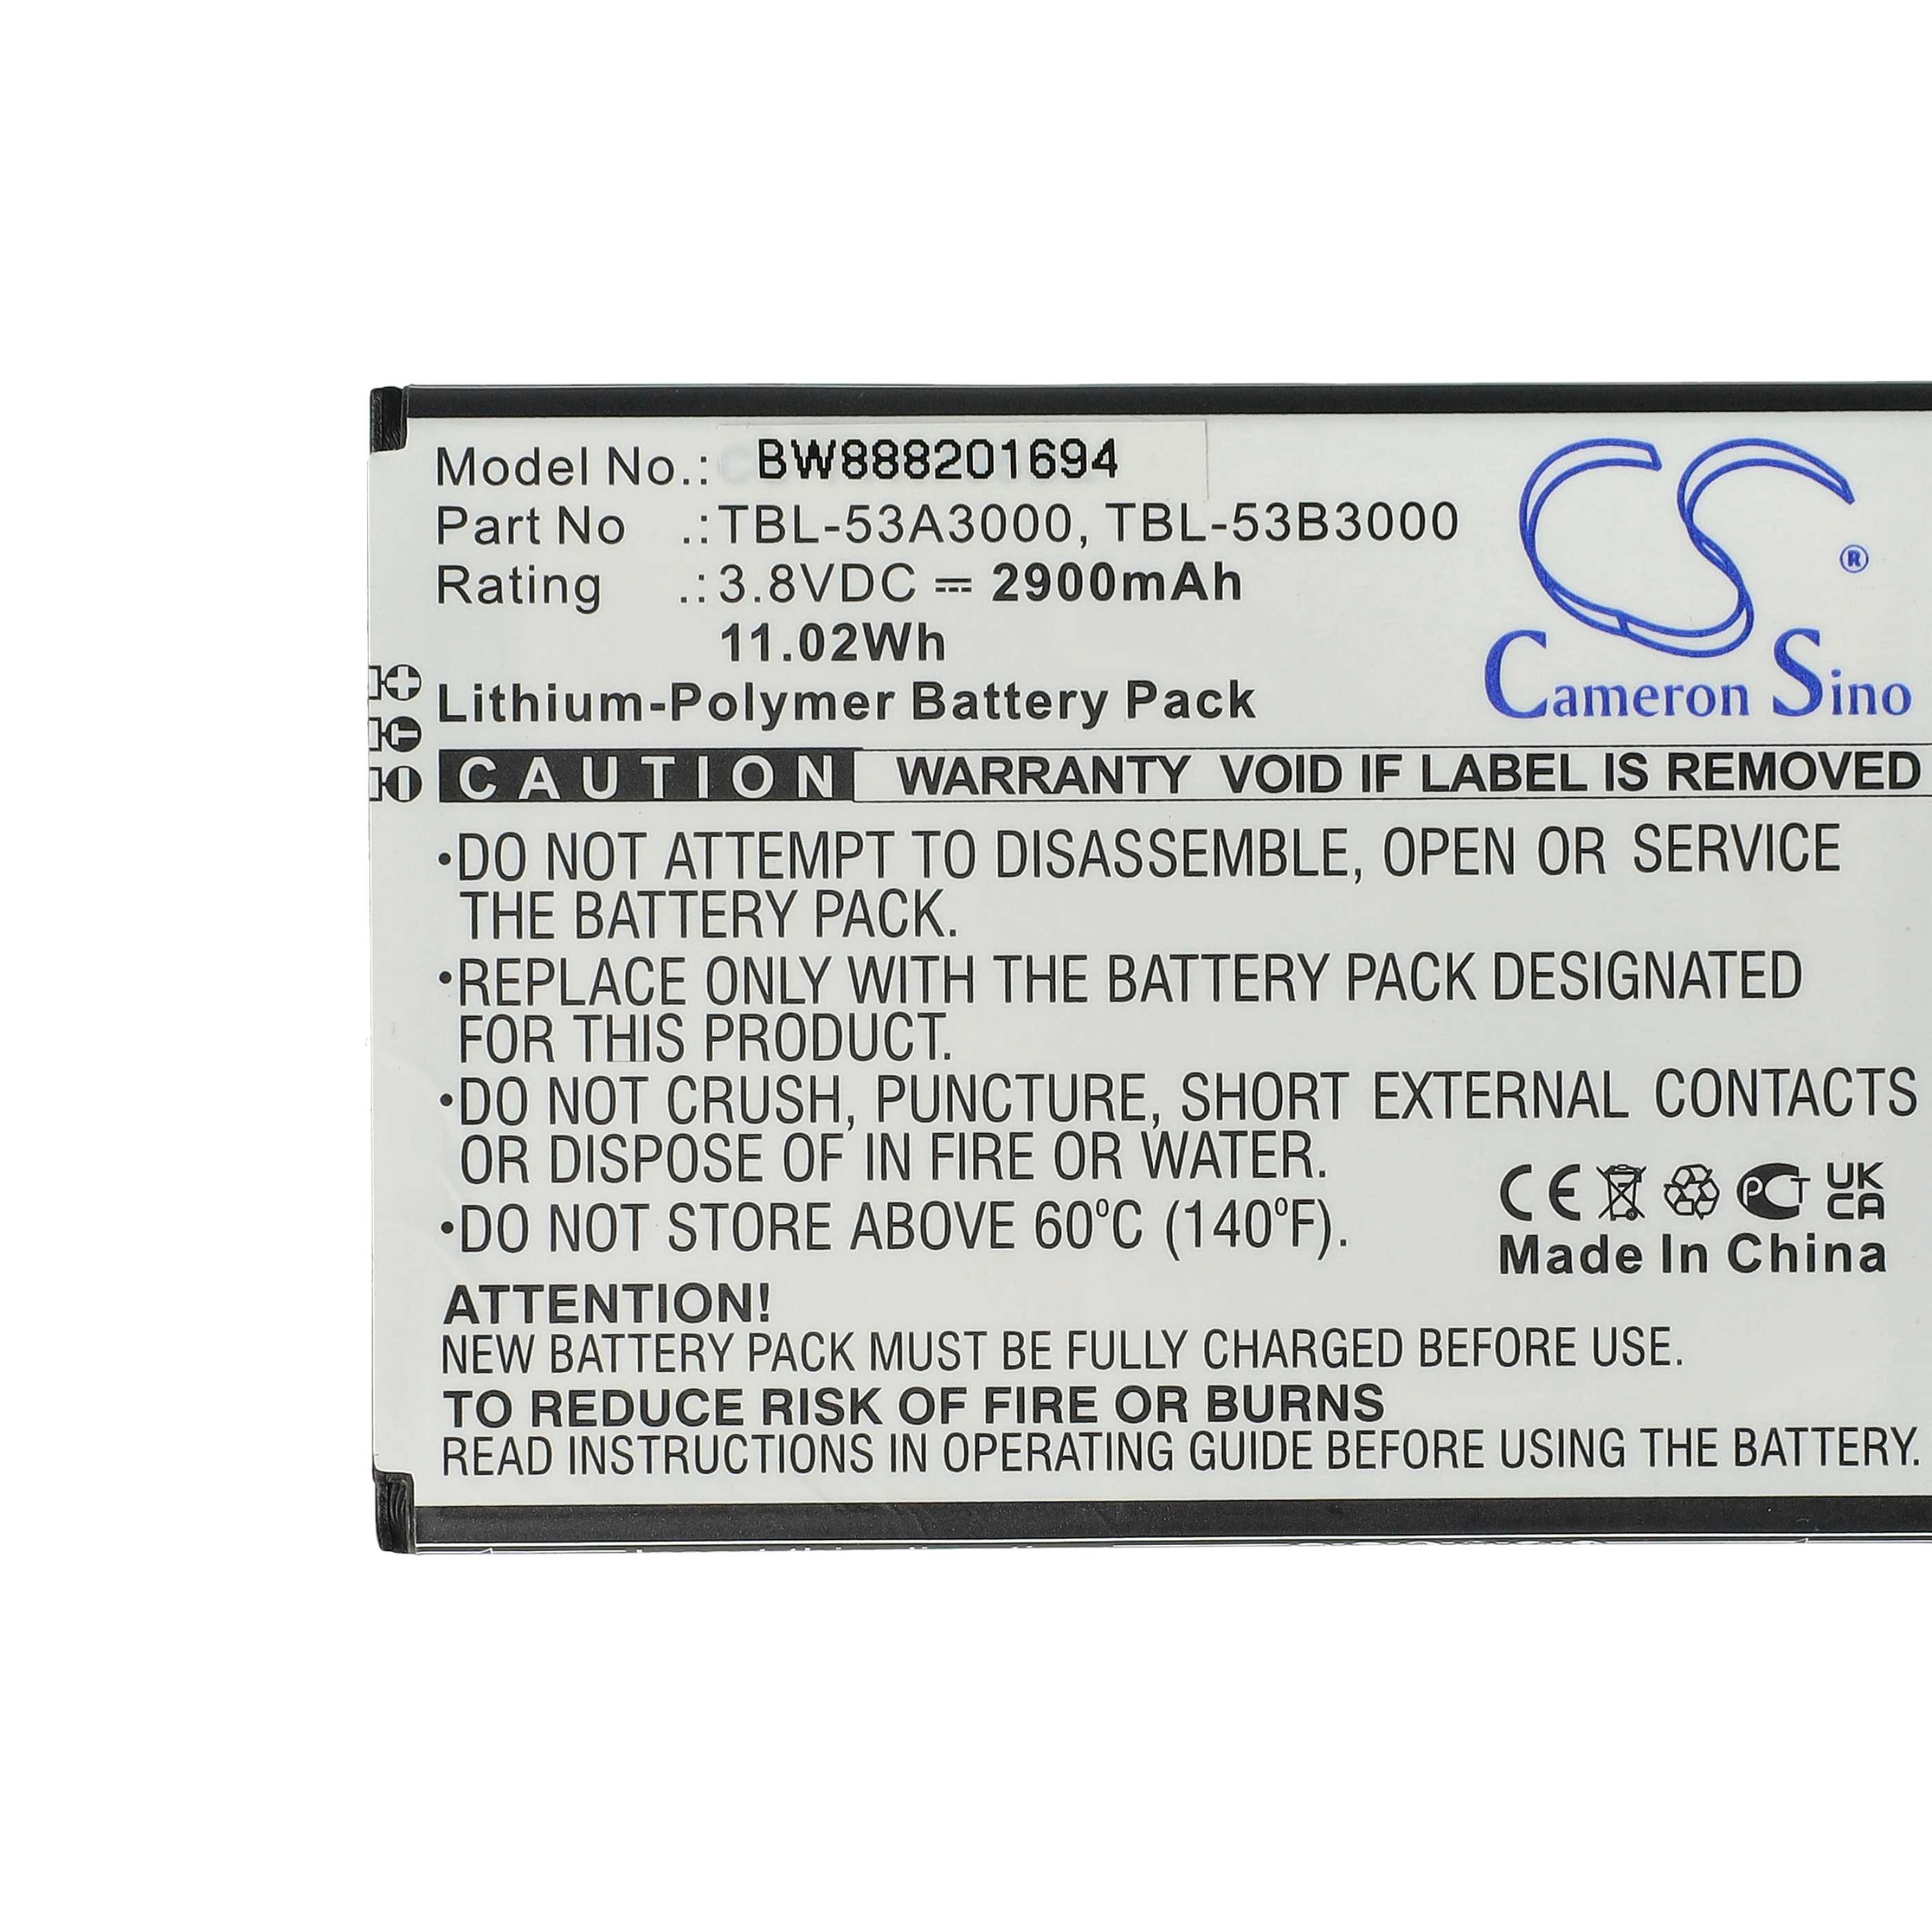 Mobile Router Battery Replacement for TP-Link TBL-53A3000, TBL-53B3000 - 2900mAh 3.8V Li-polymer